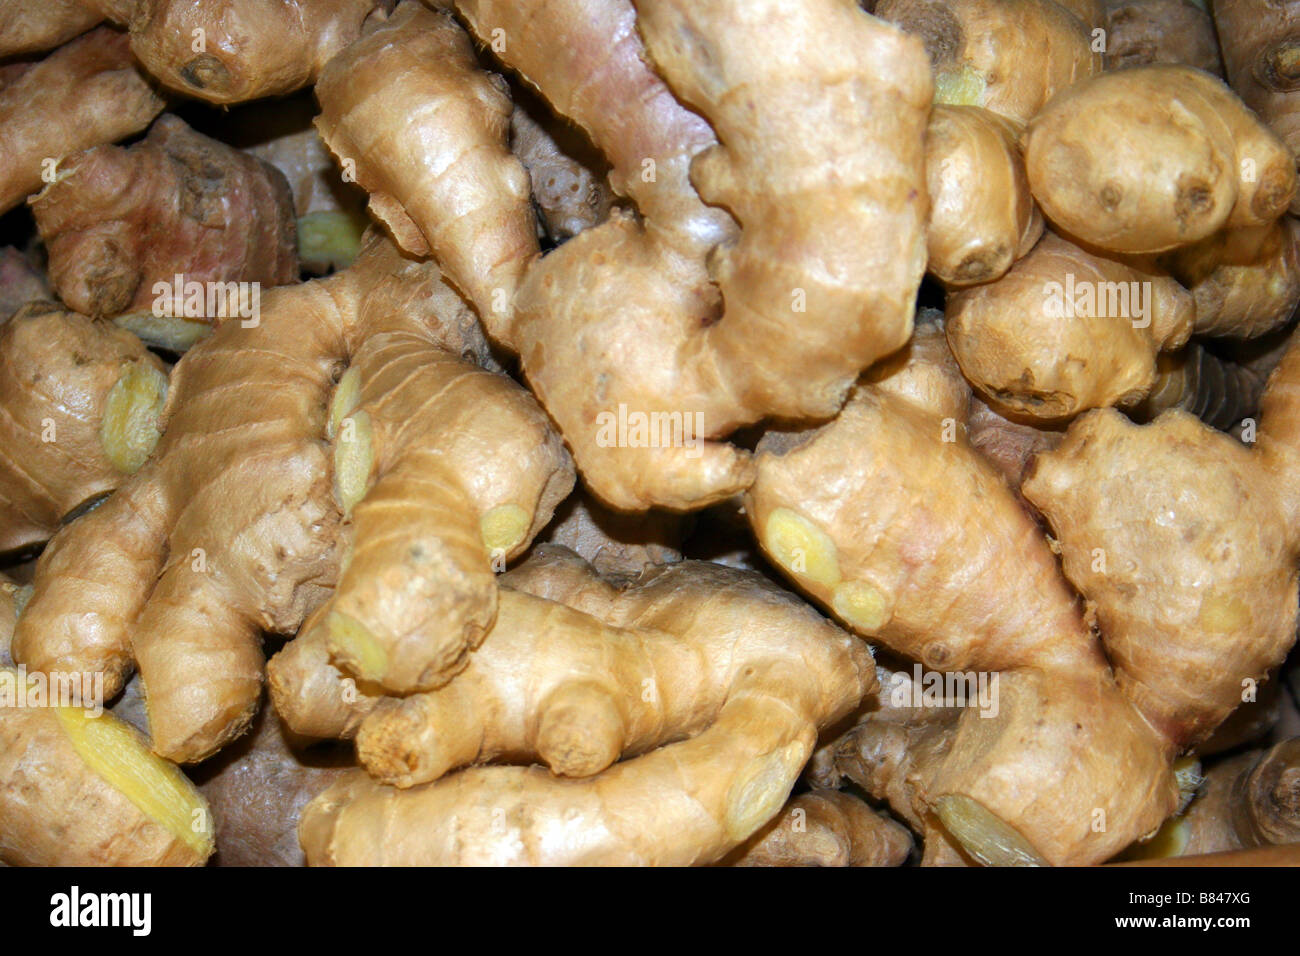 ginger root vegetable Stock Photo